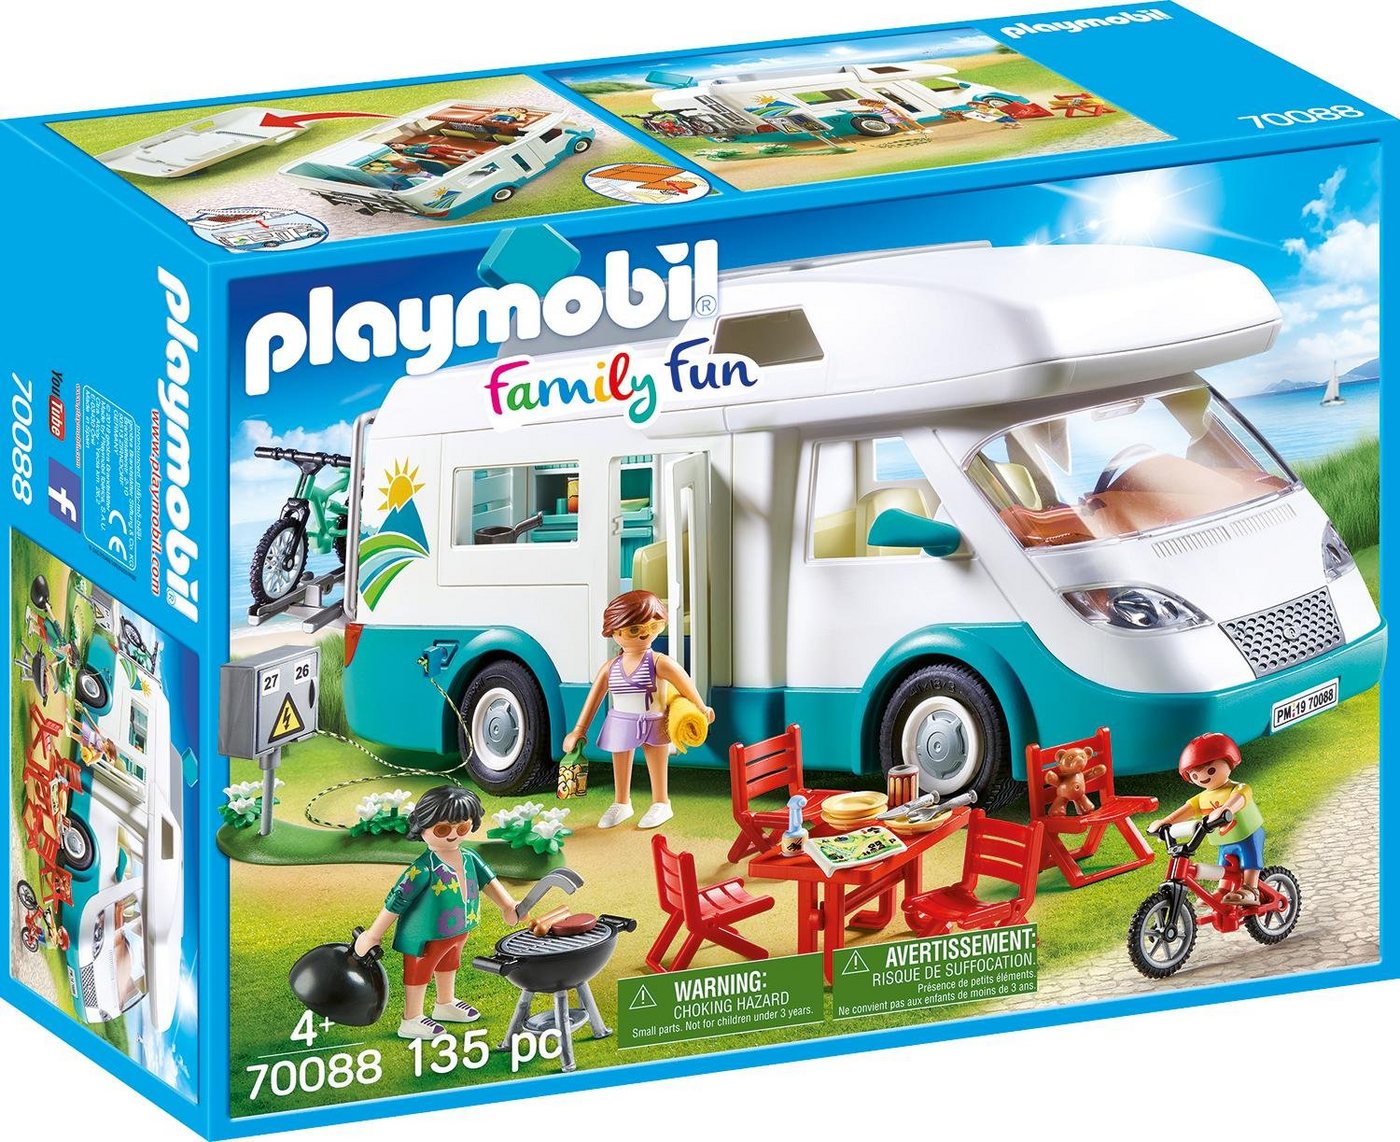 Playmobil® Konstruktions-Spielset Familien-Wohnmobil, Family Fun, (135 St), Made in Europe von Playmobil®